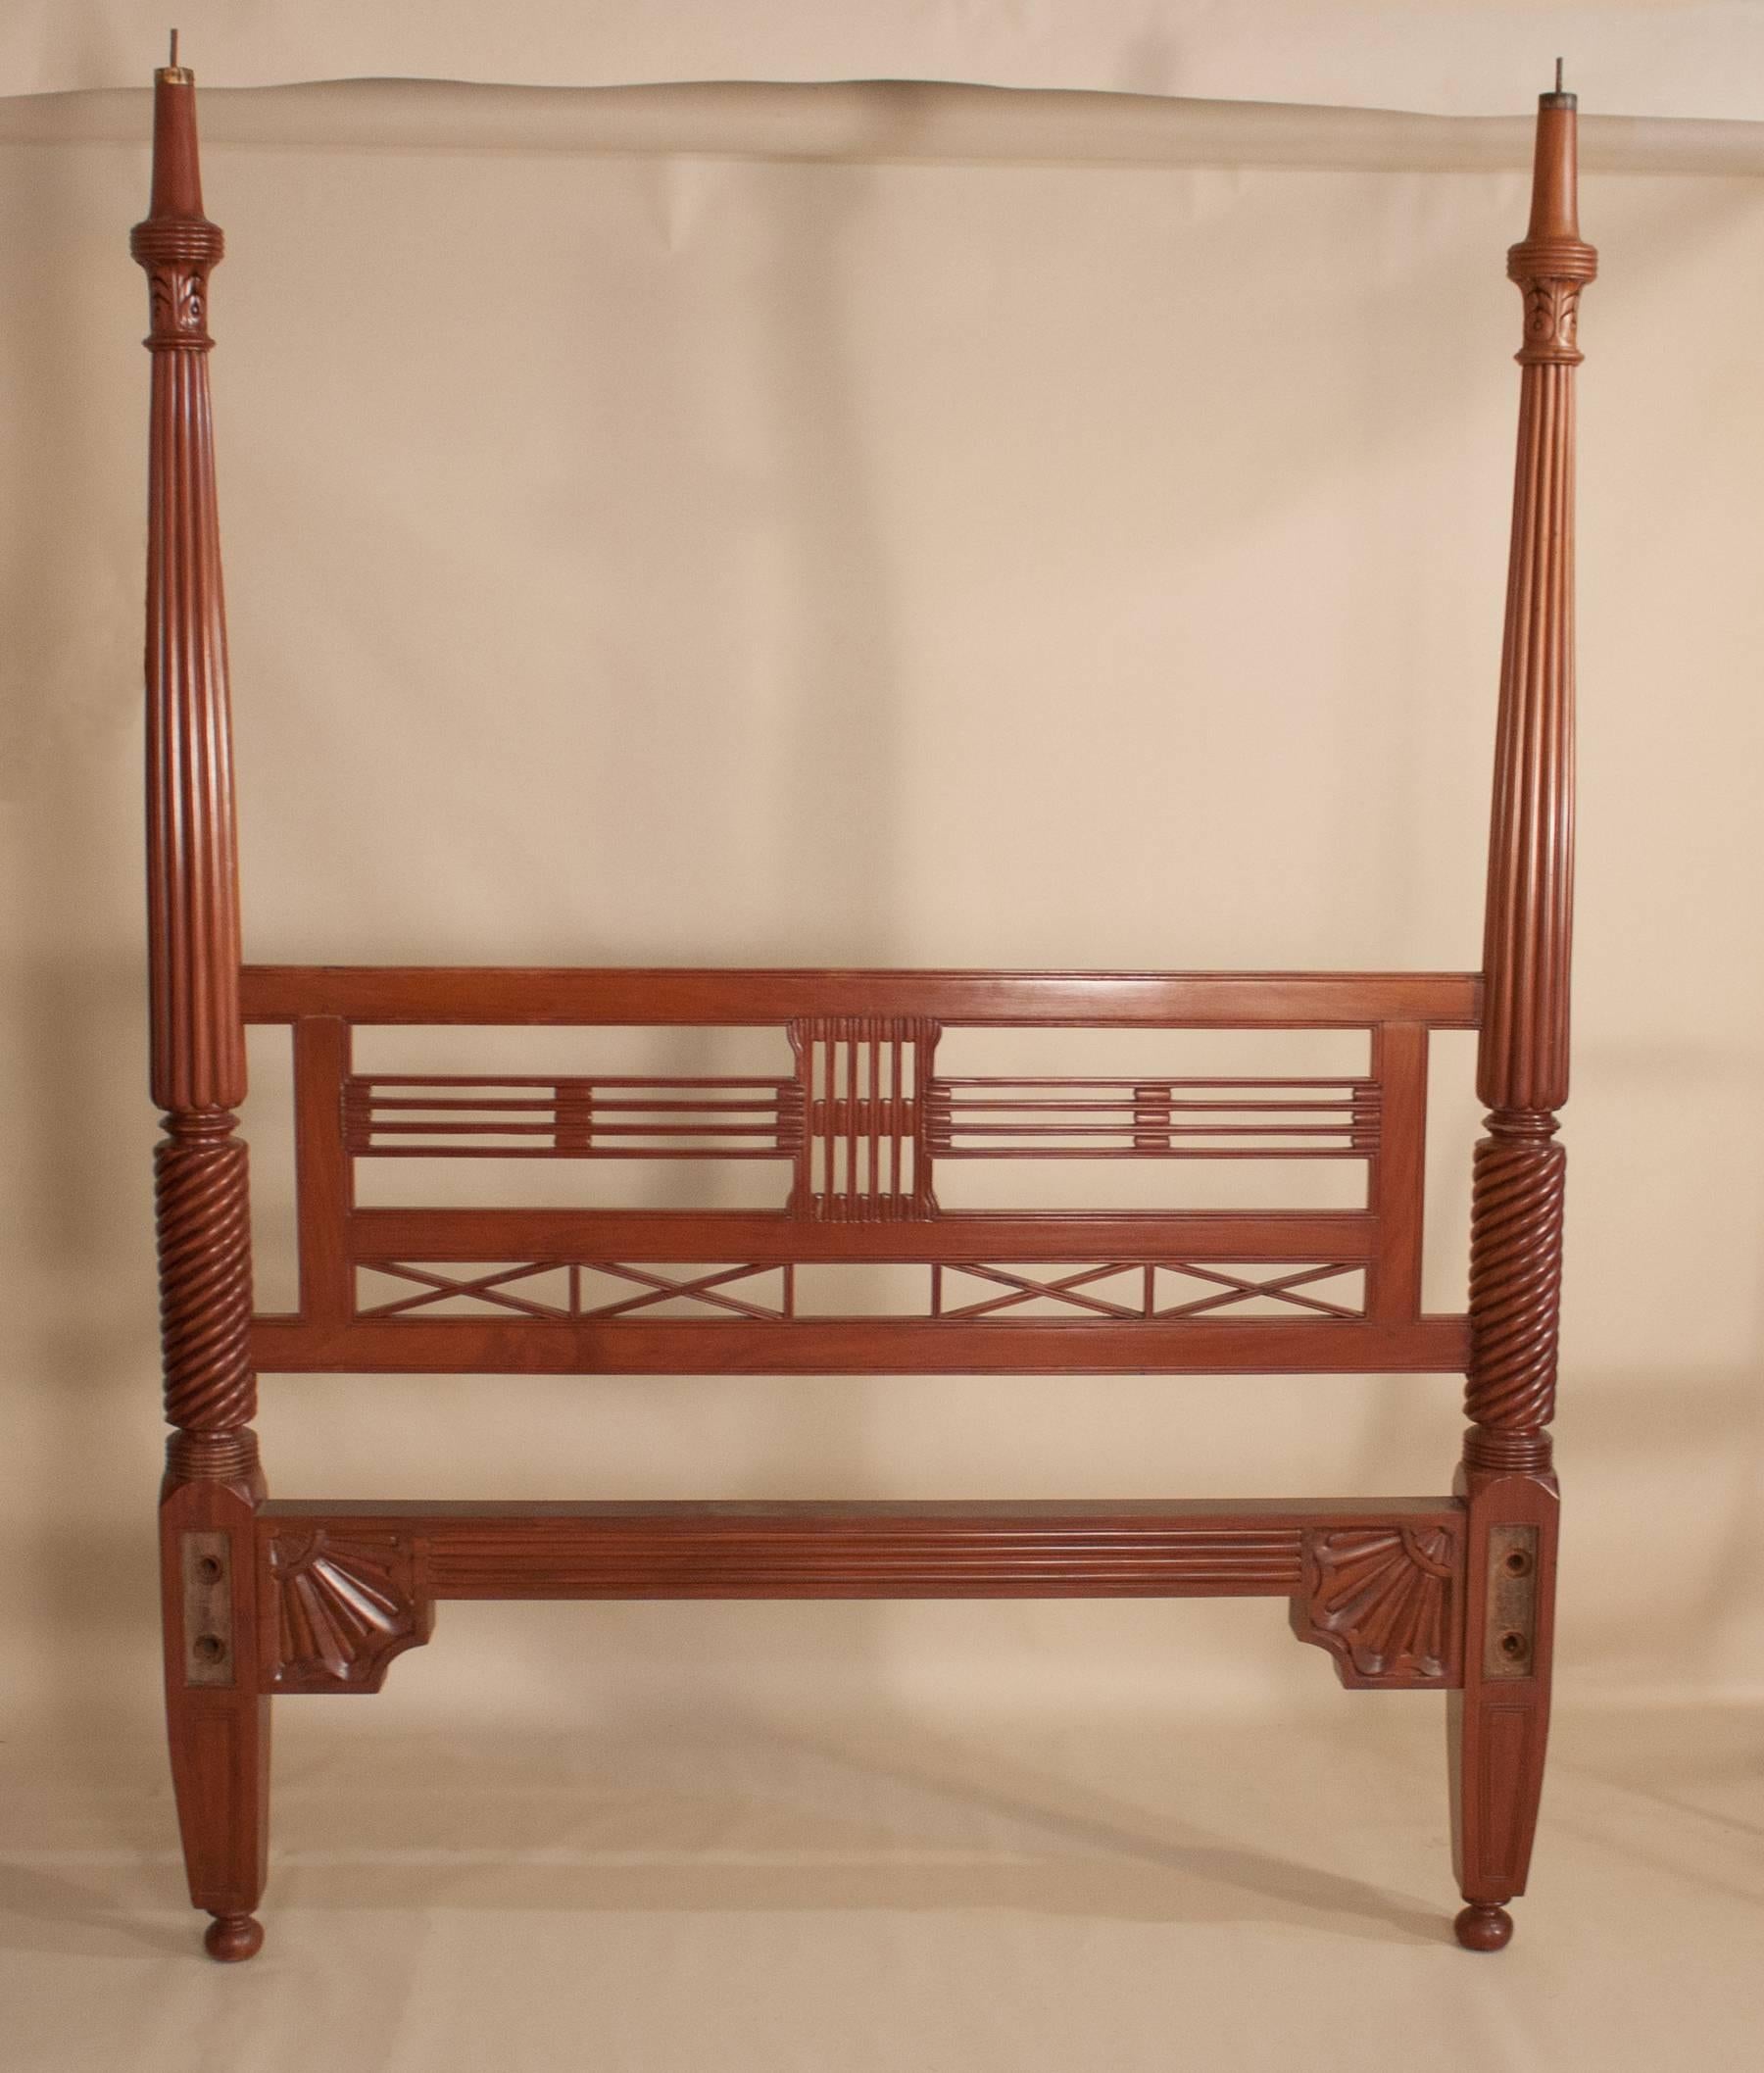 Four Post Mahogany Canopy Bed from British India 3